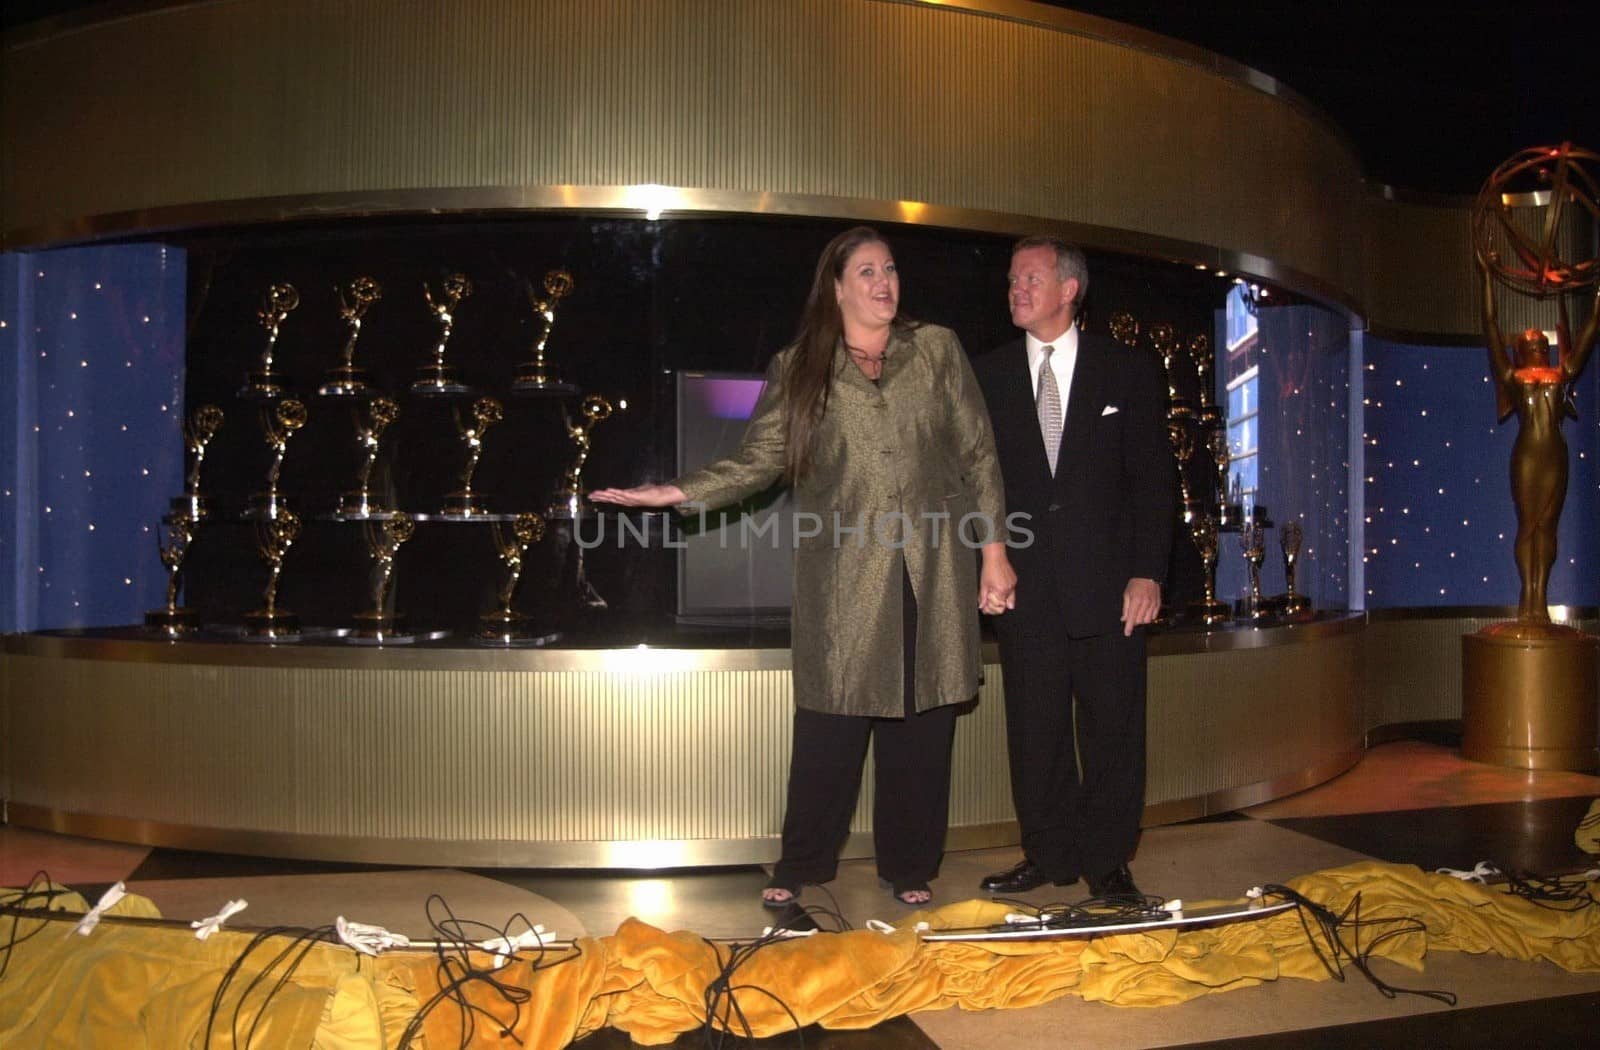 Camryn Manheim, Jim Chain and The Emmys at the arrival of the Emmy Statues at Universal Studios. 08-22-00